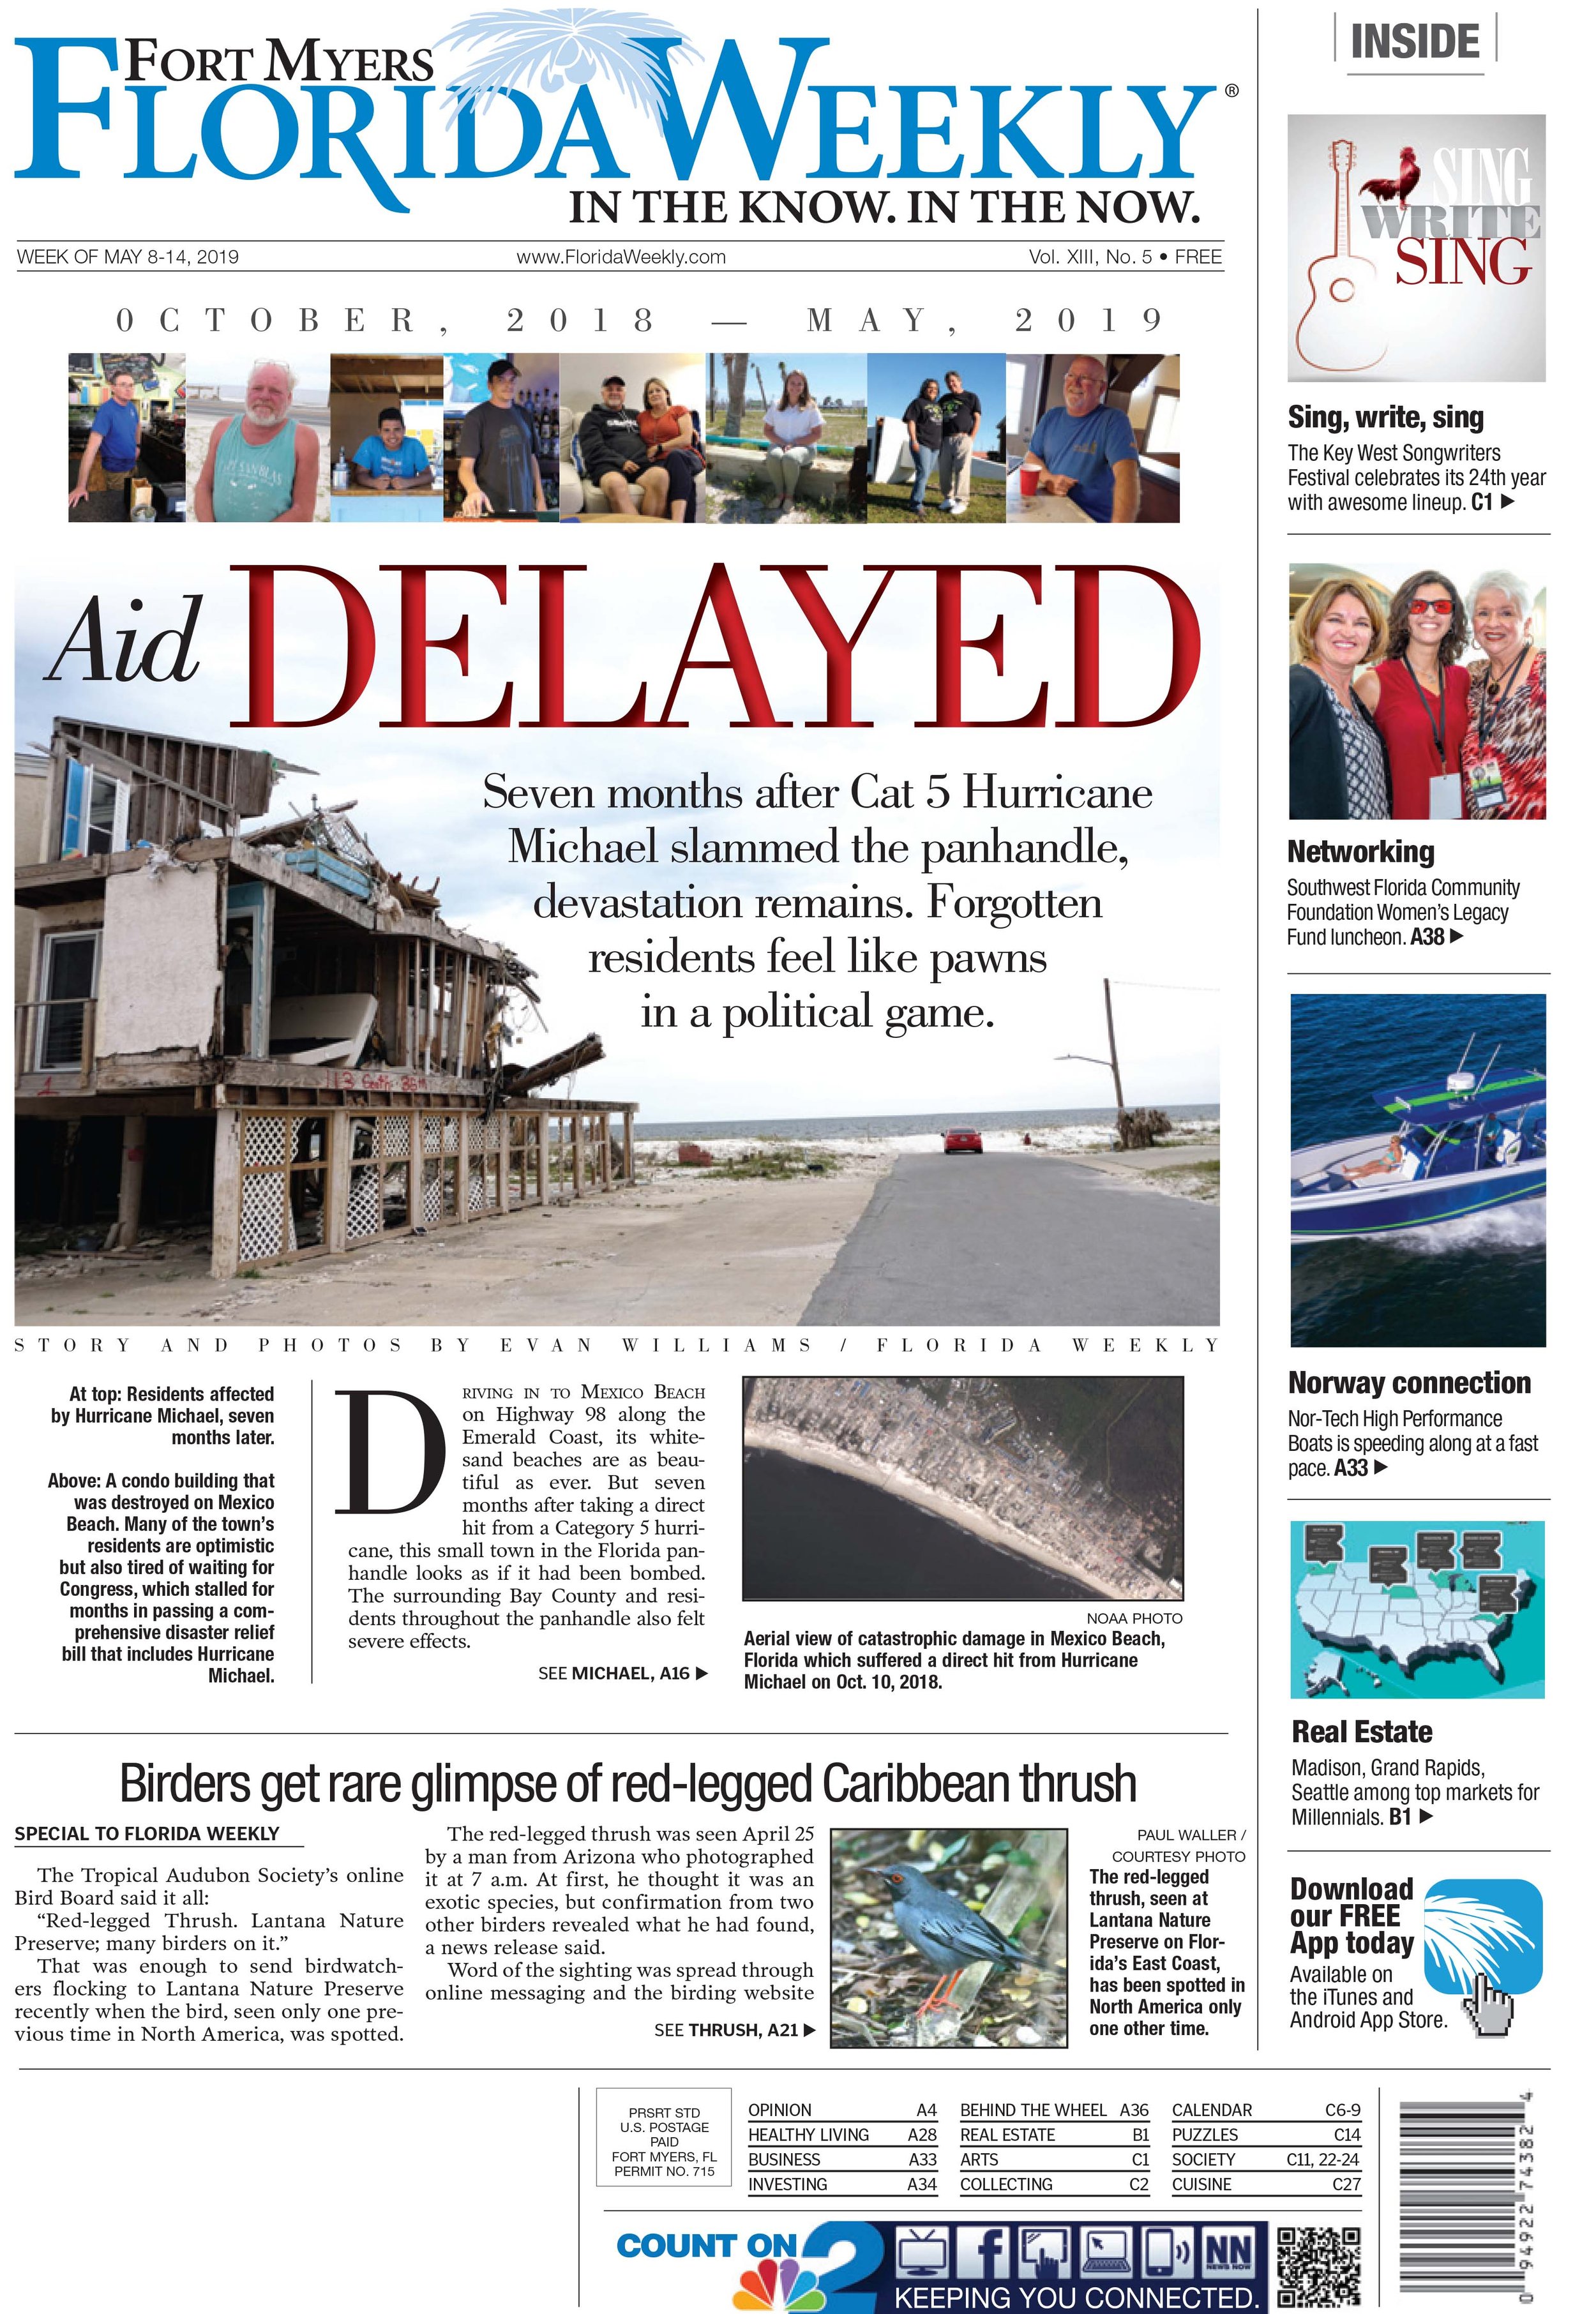 Aid Delayed: Seven months after Cat 5 Hurricane Michael slammed the panhandle, devastation remains.